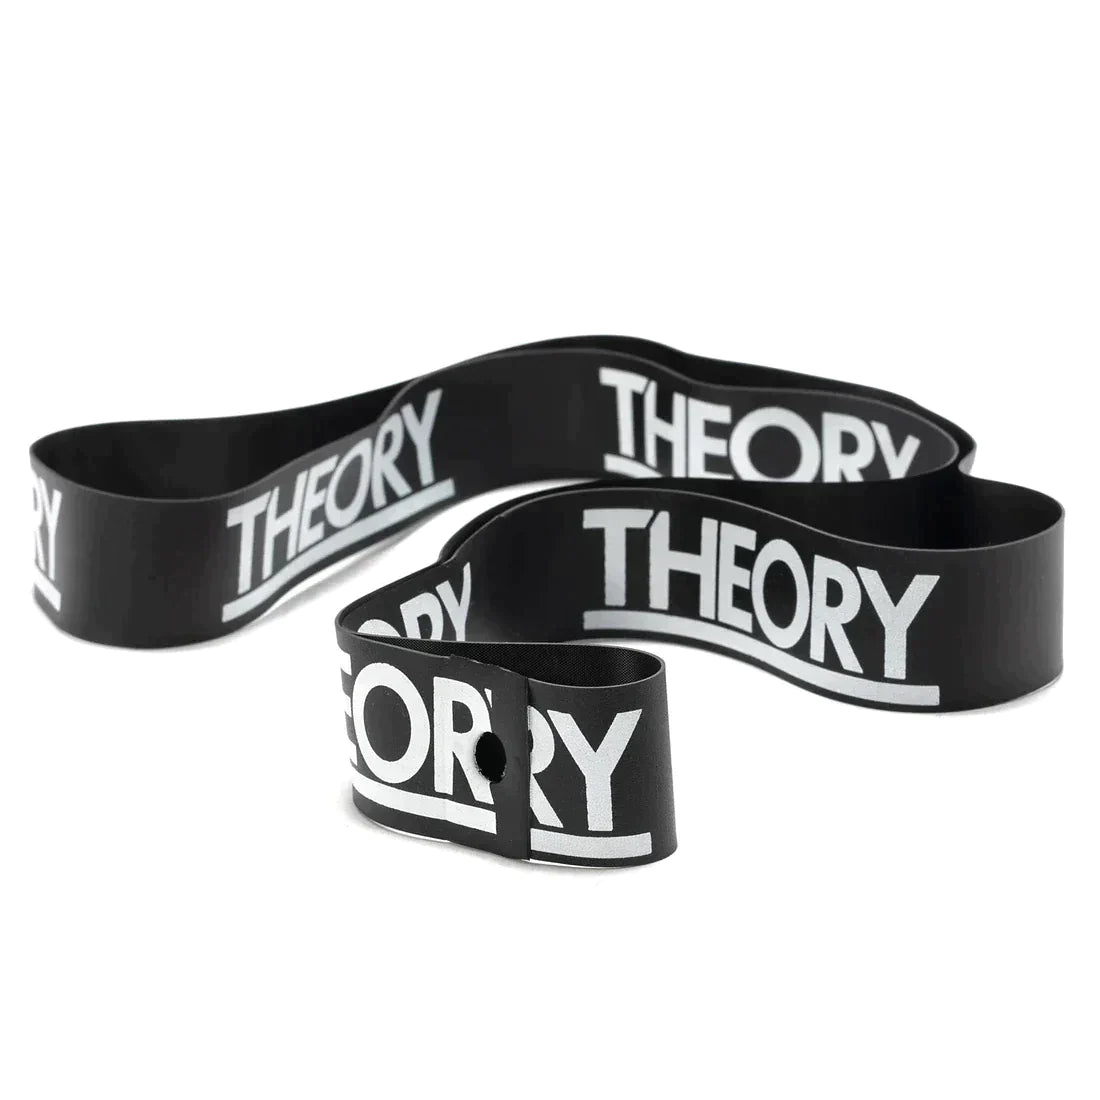 29" Theory Rim Strips - Pair - 30mm wide